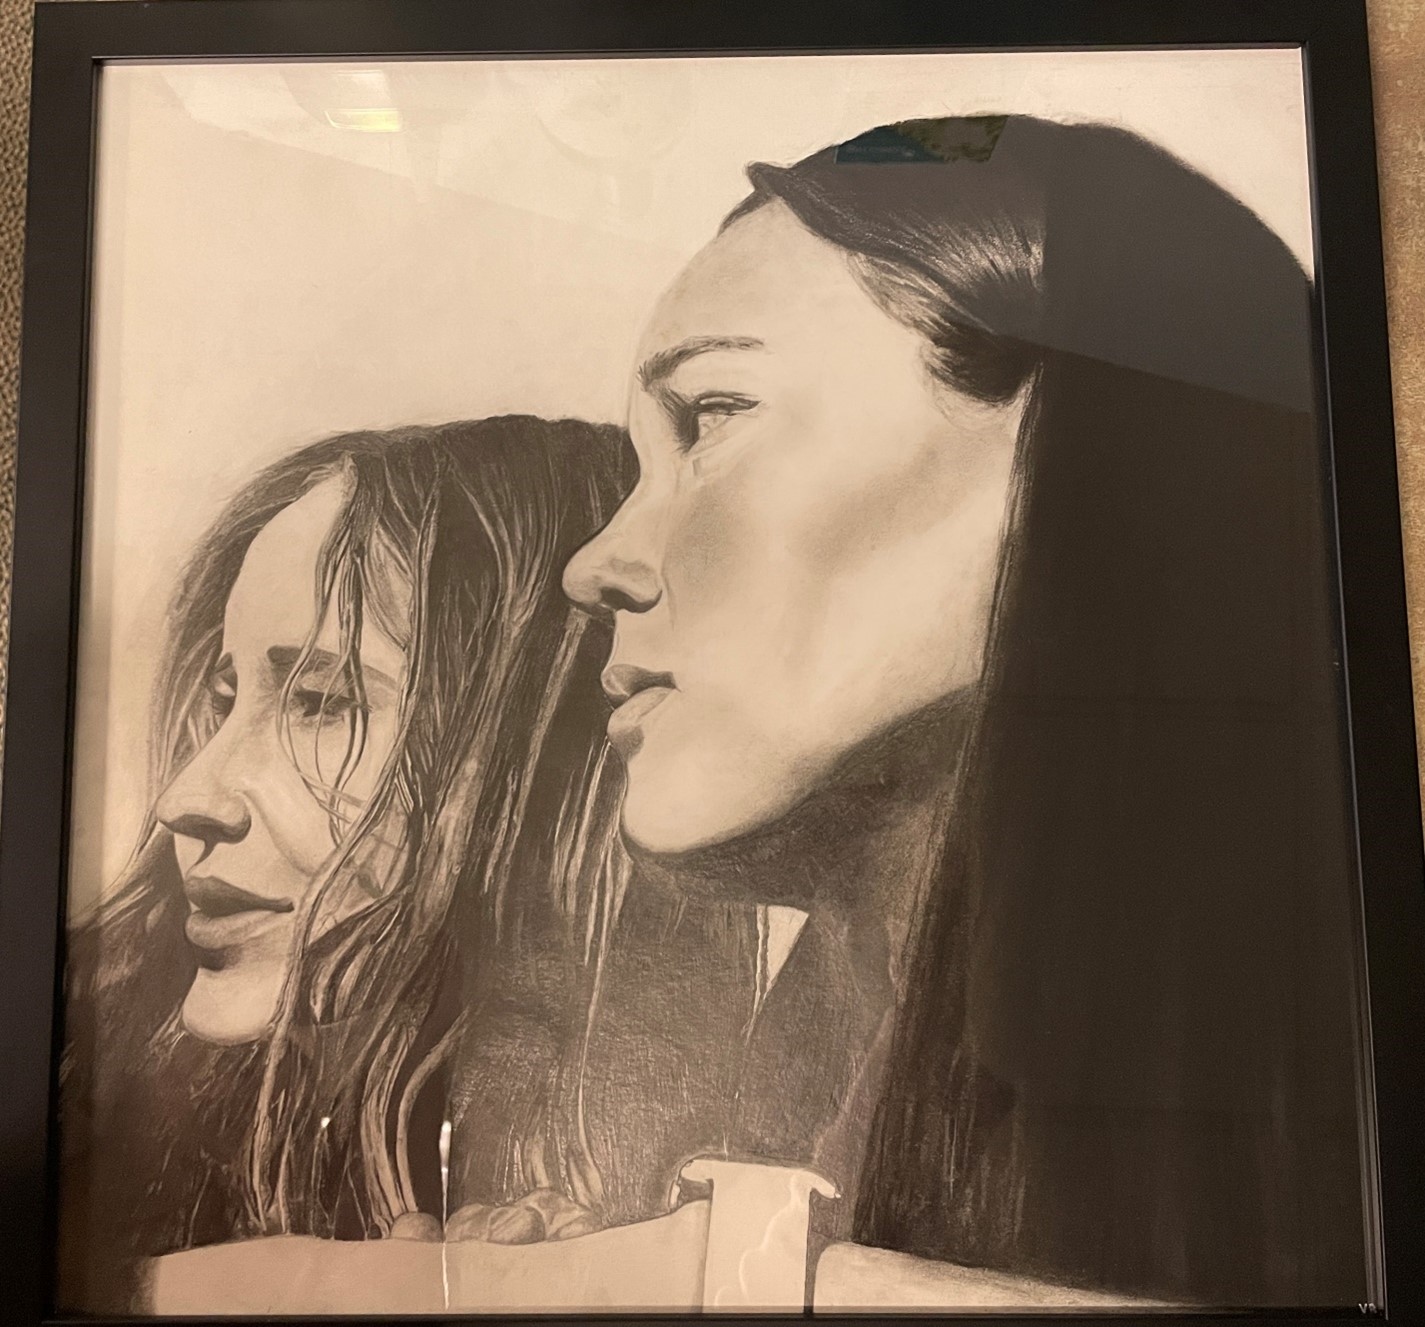 A charcoal and graphite drawing of two people from the next up.